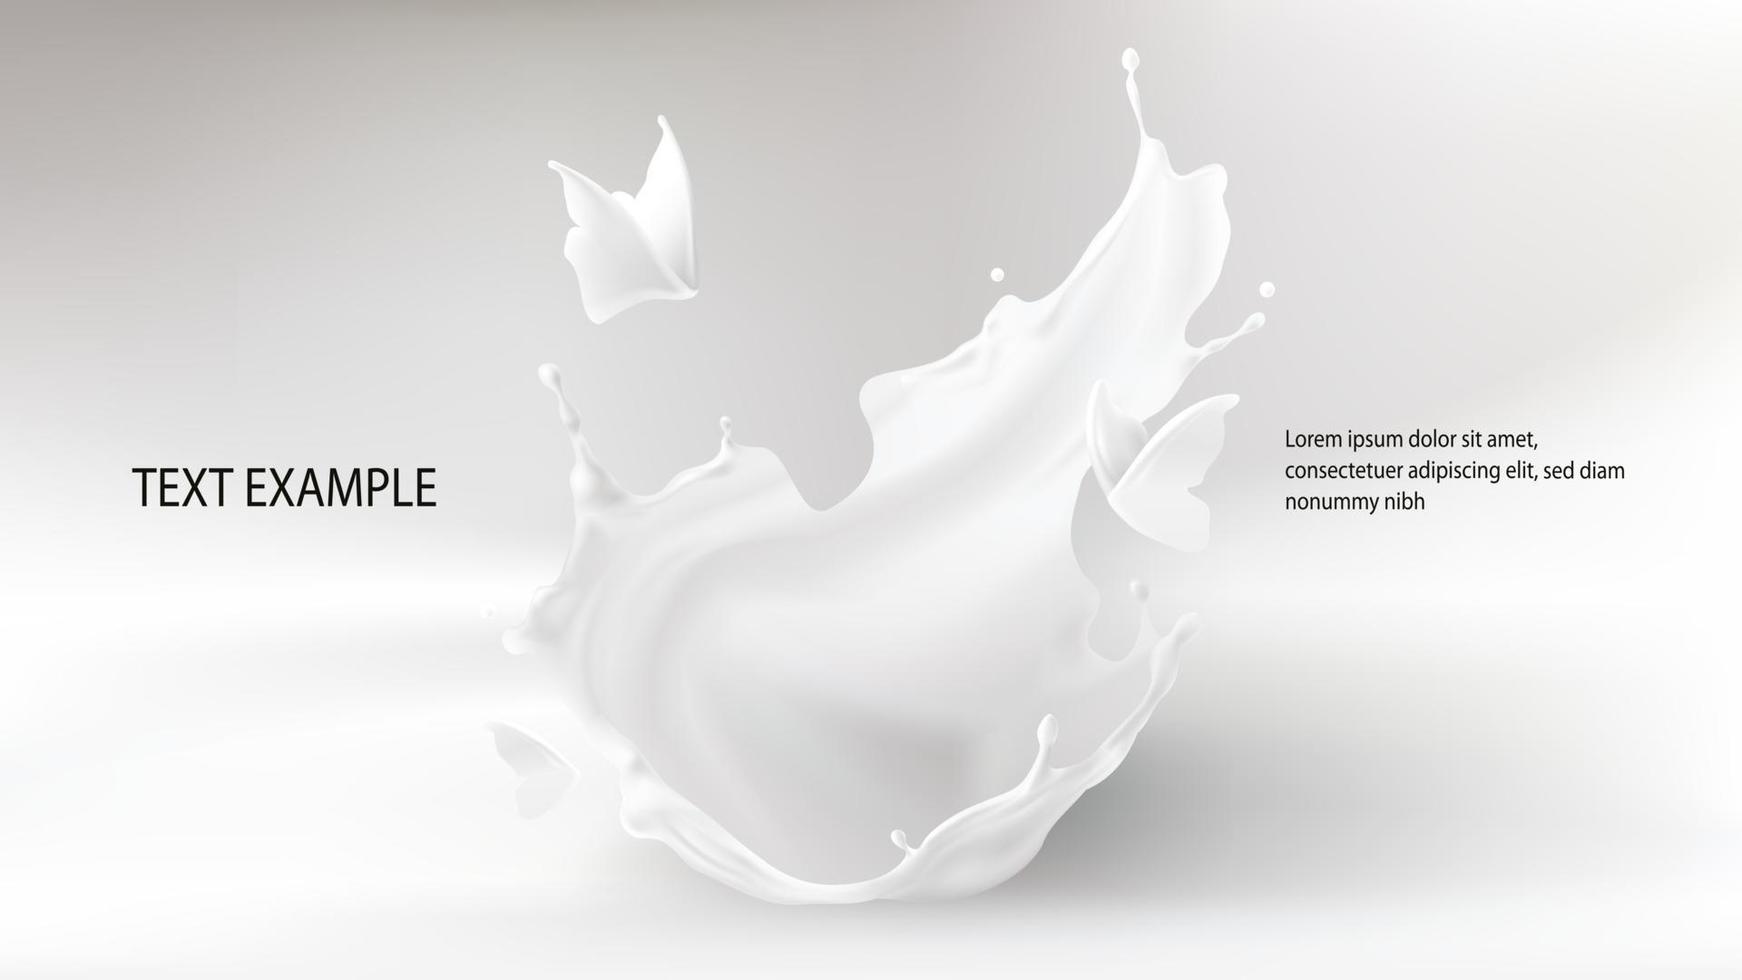 Milk splash, crown shape and butterfly silhouettes vector